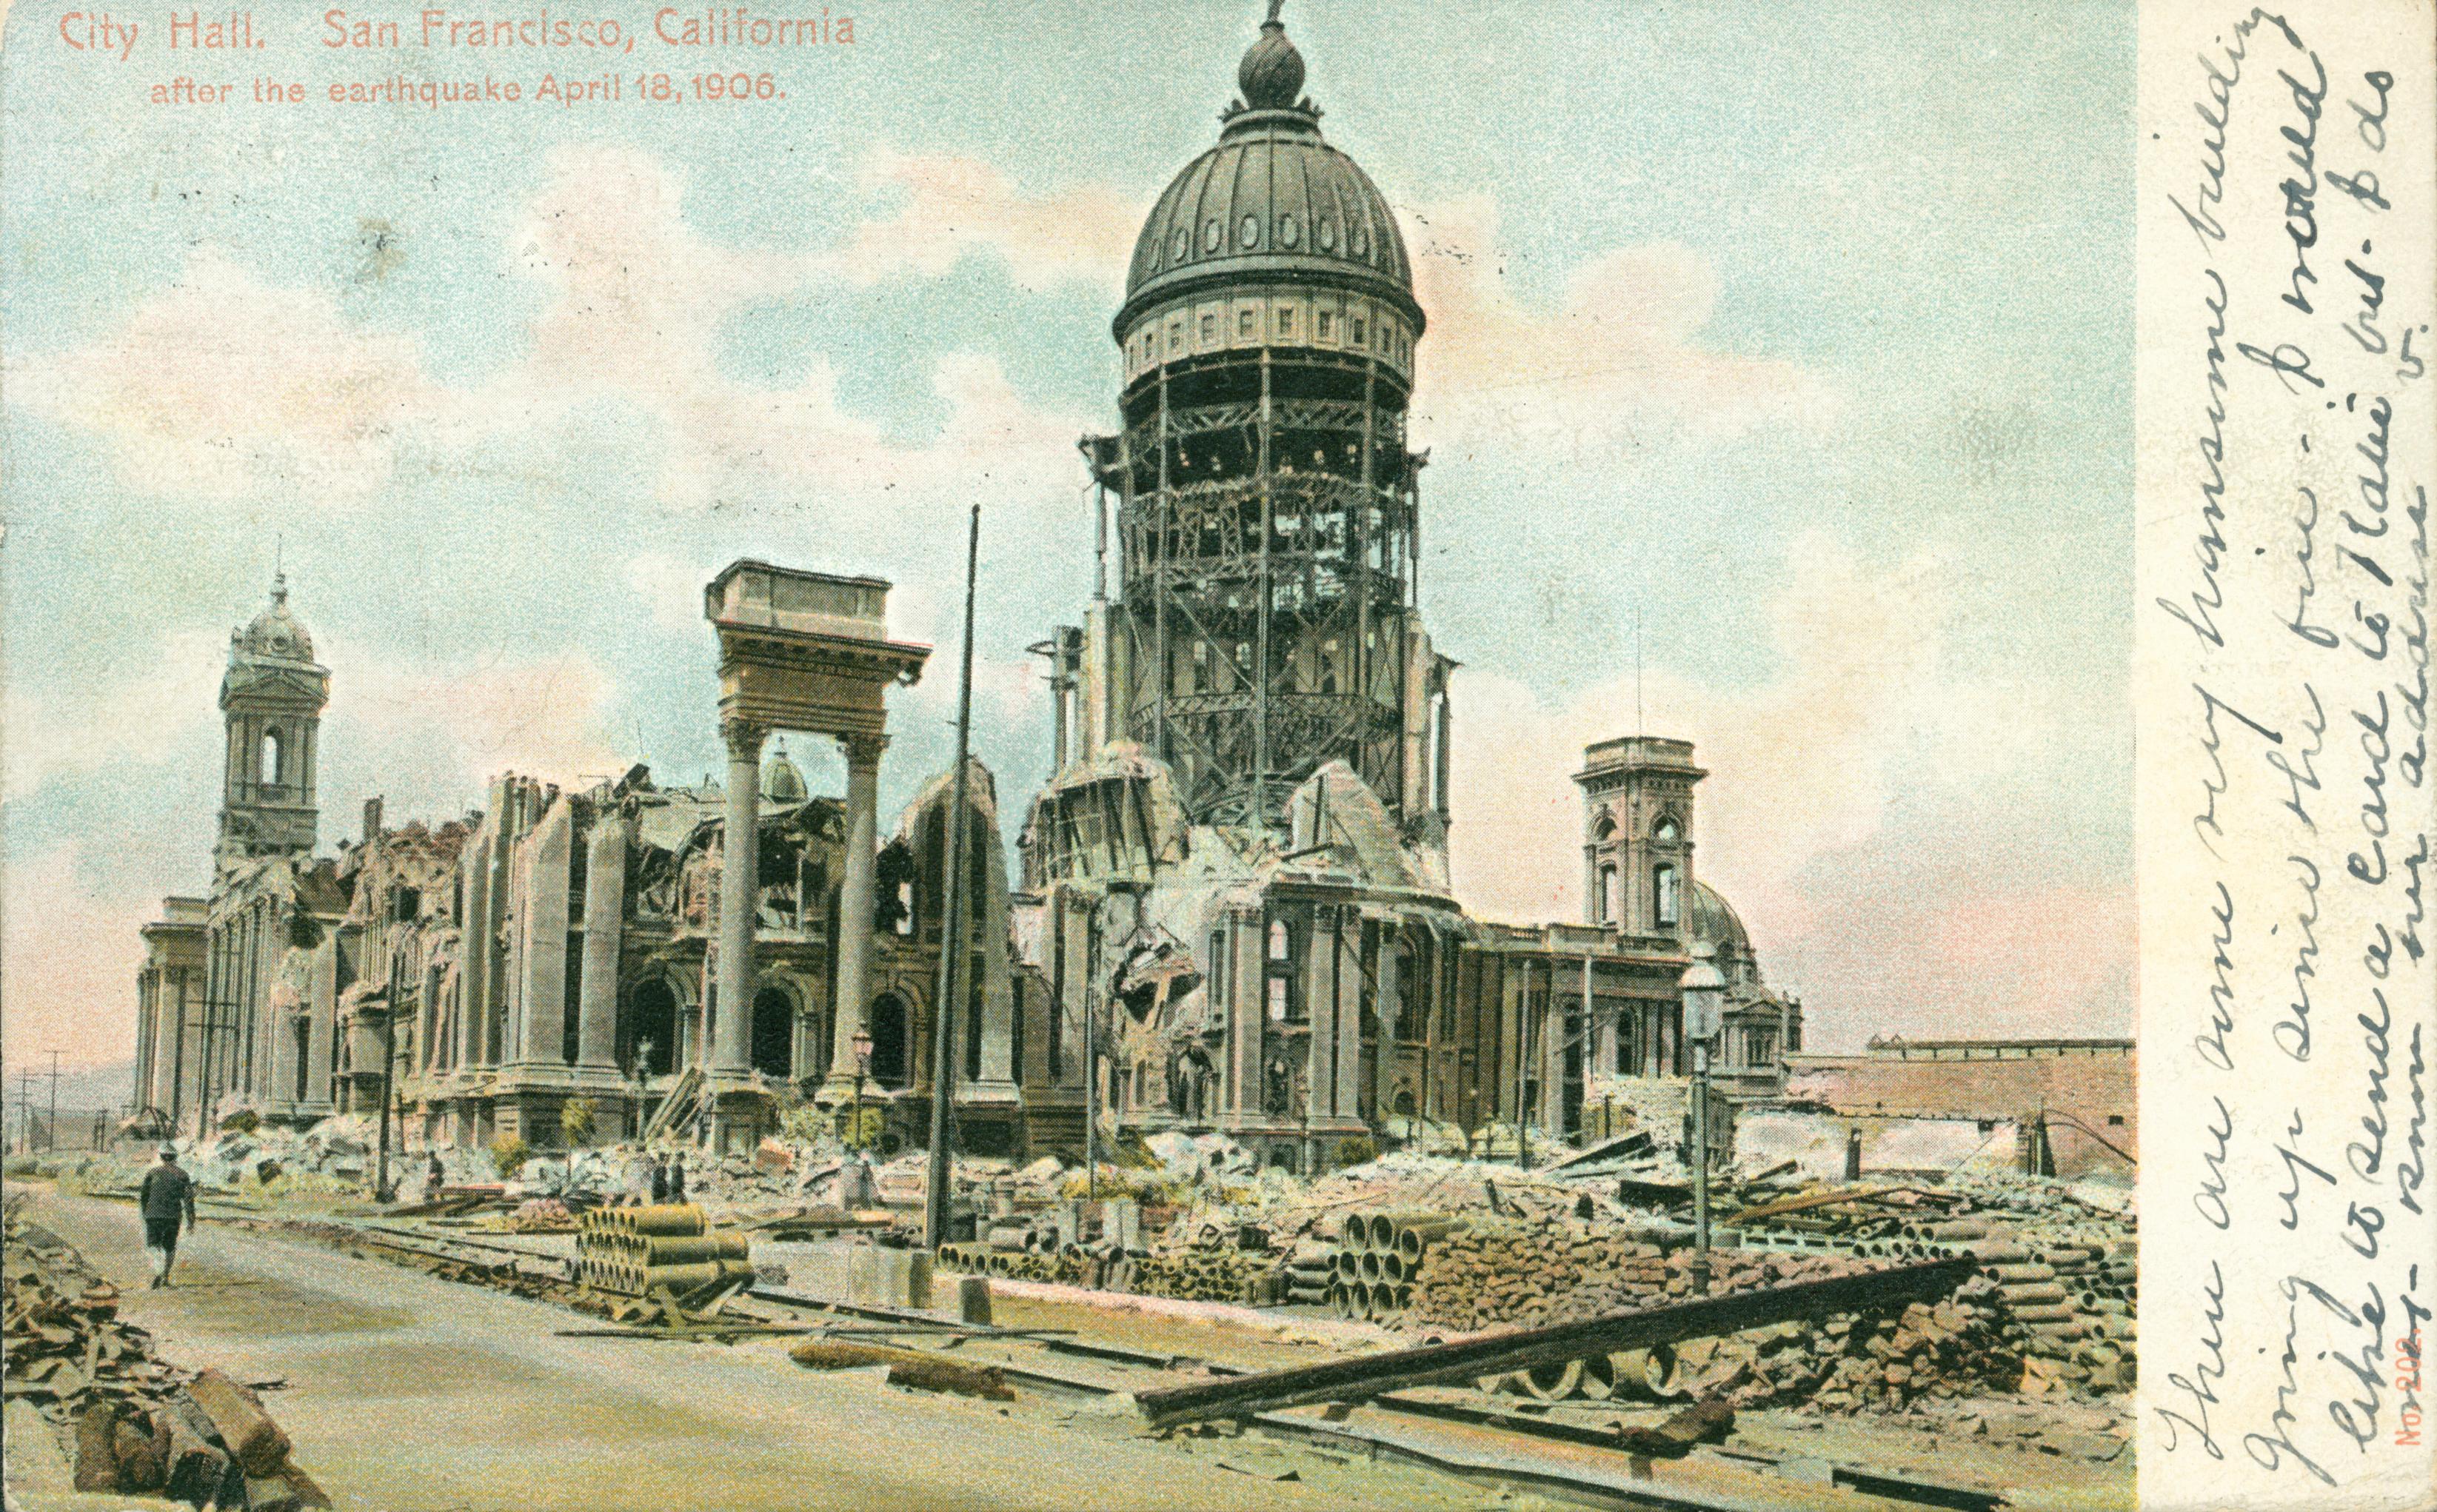 Drawing of the destruction of City Hall.